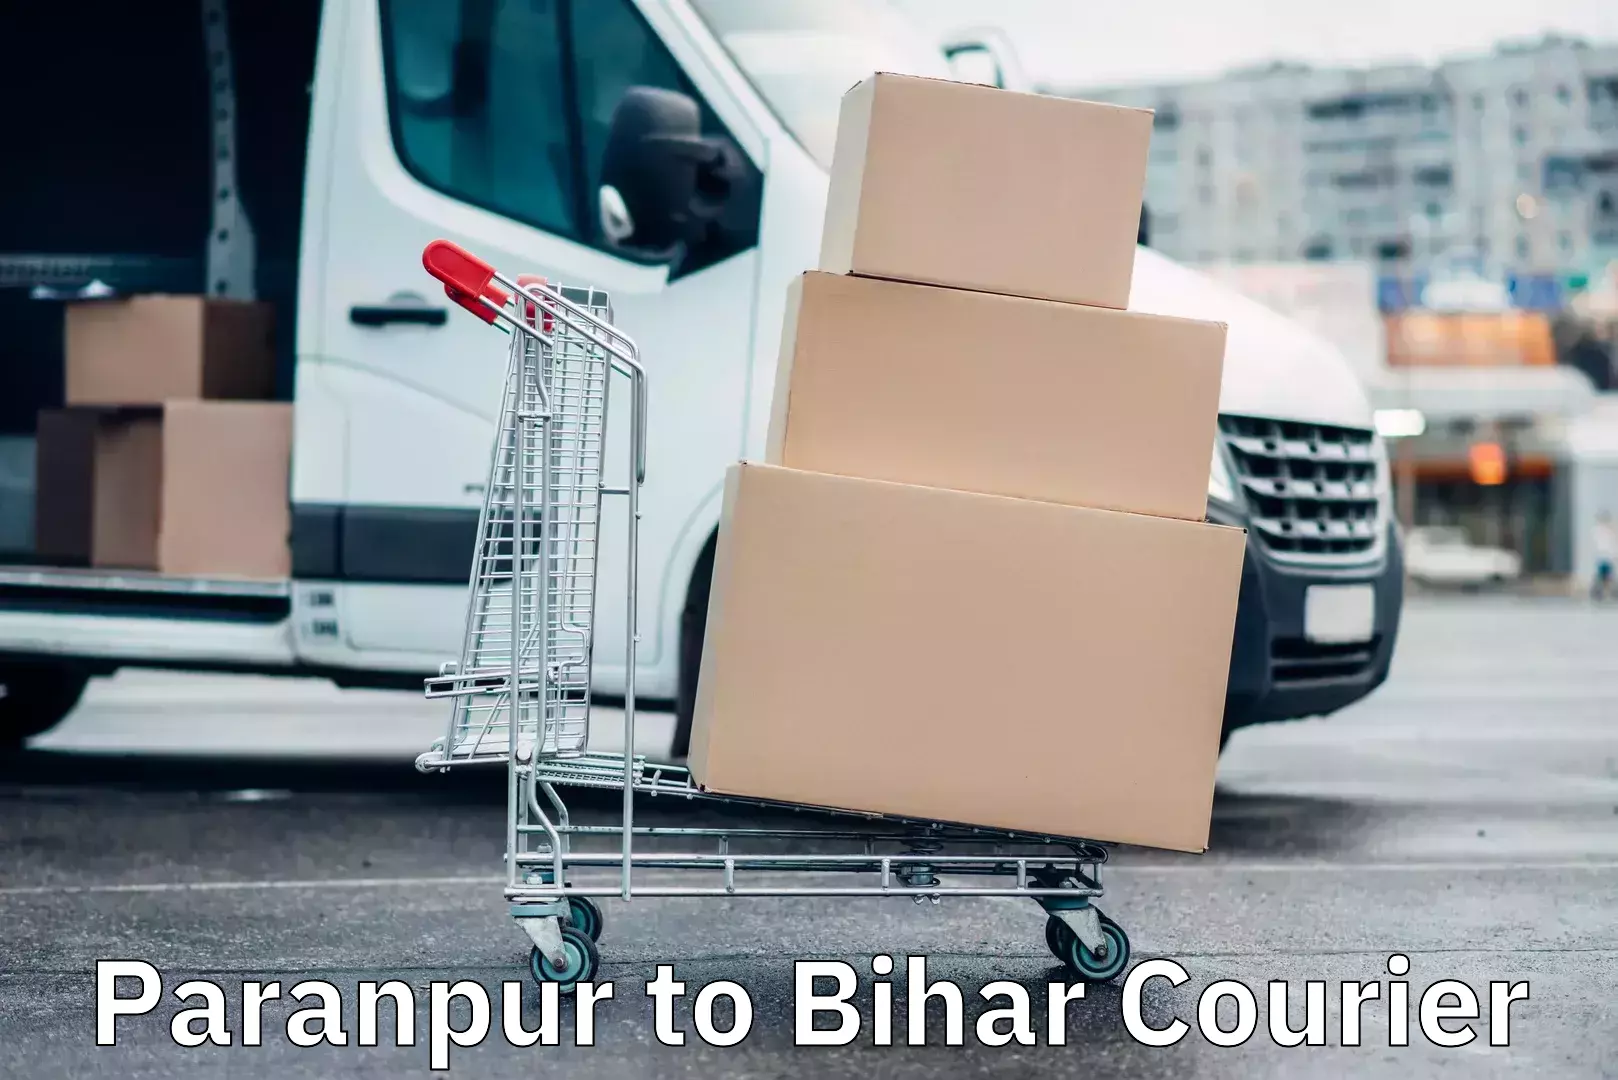 Courier service innovation Paranpur to Bihar